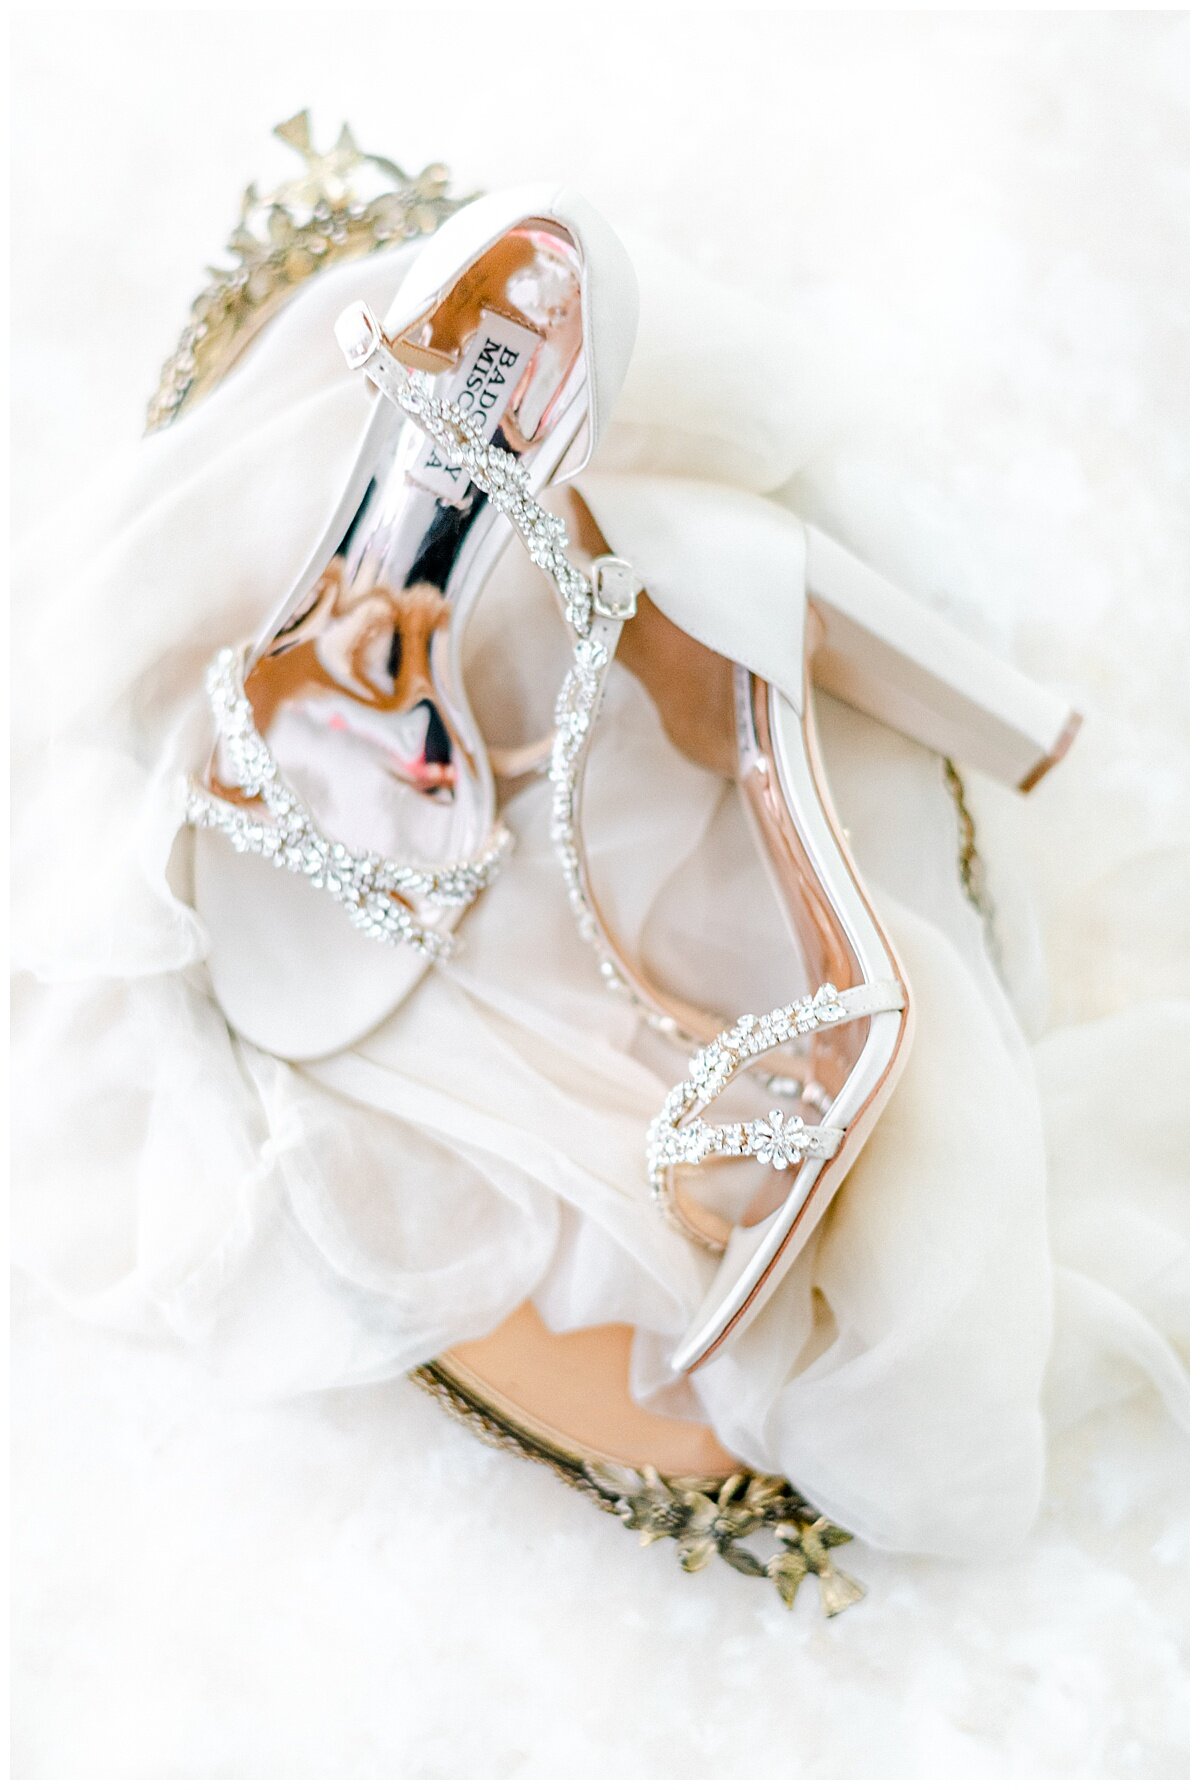 white wedding shoes on a gold tray